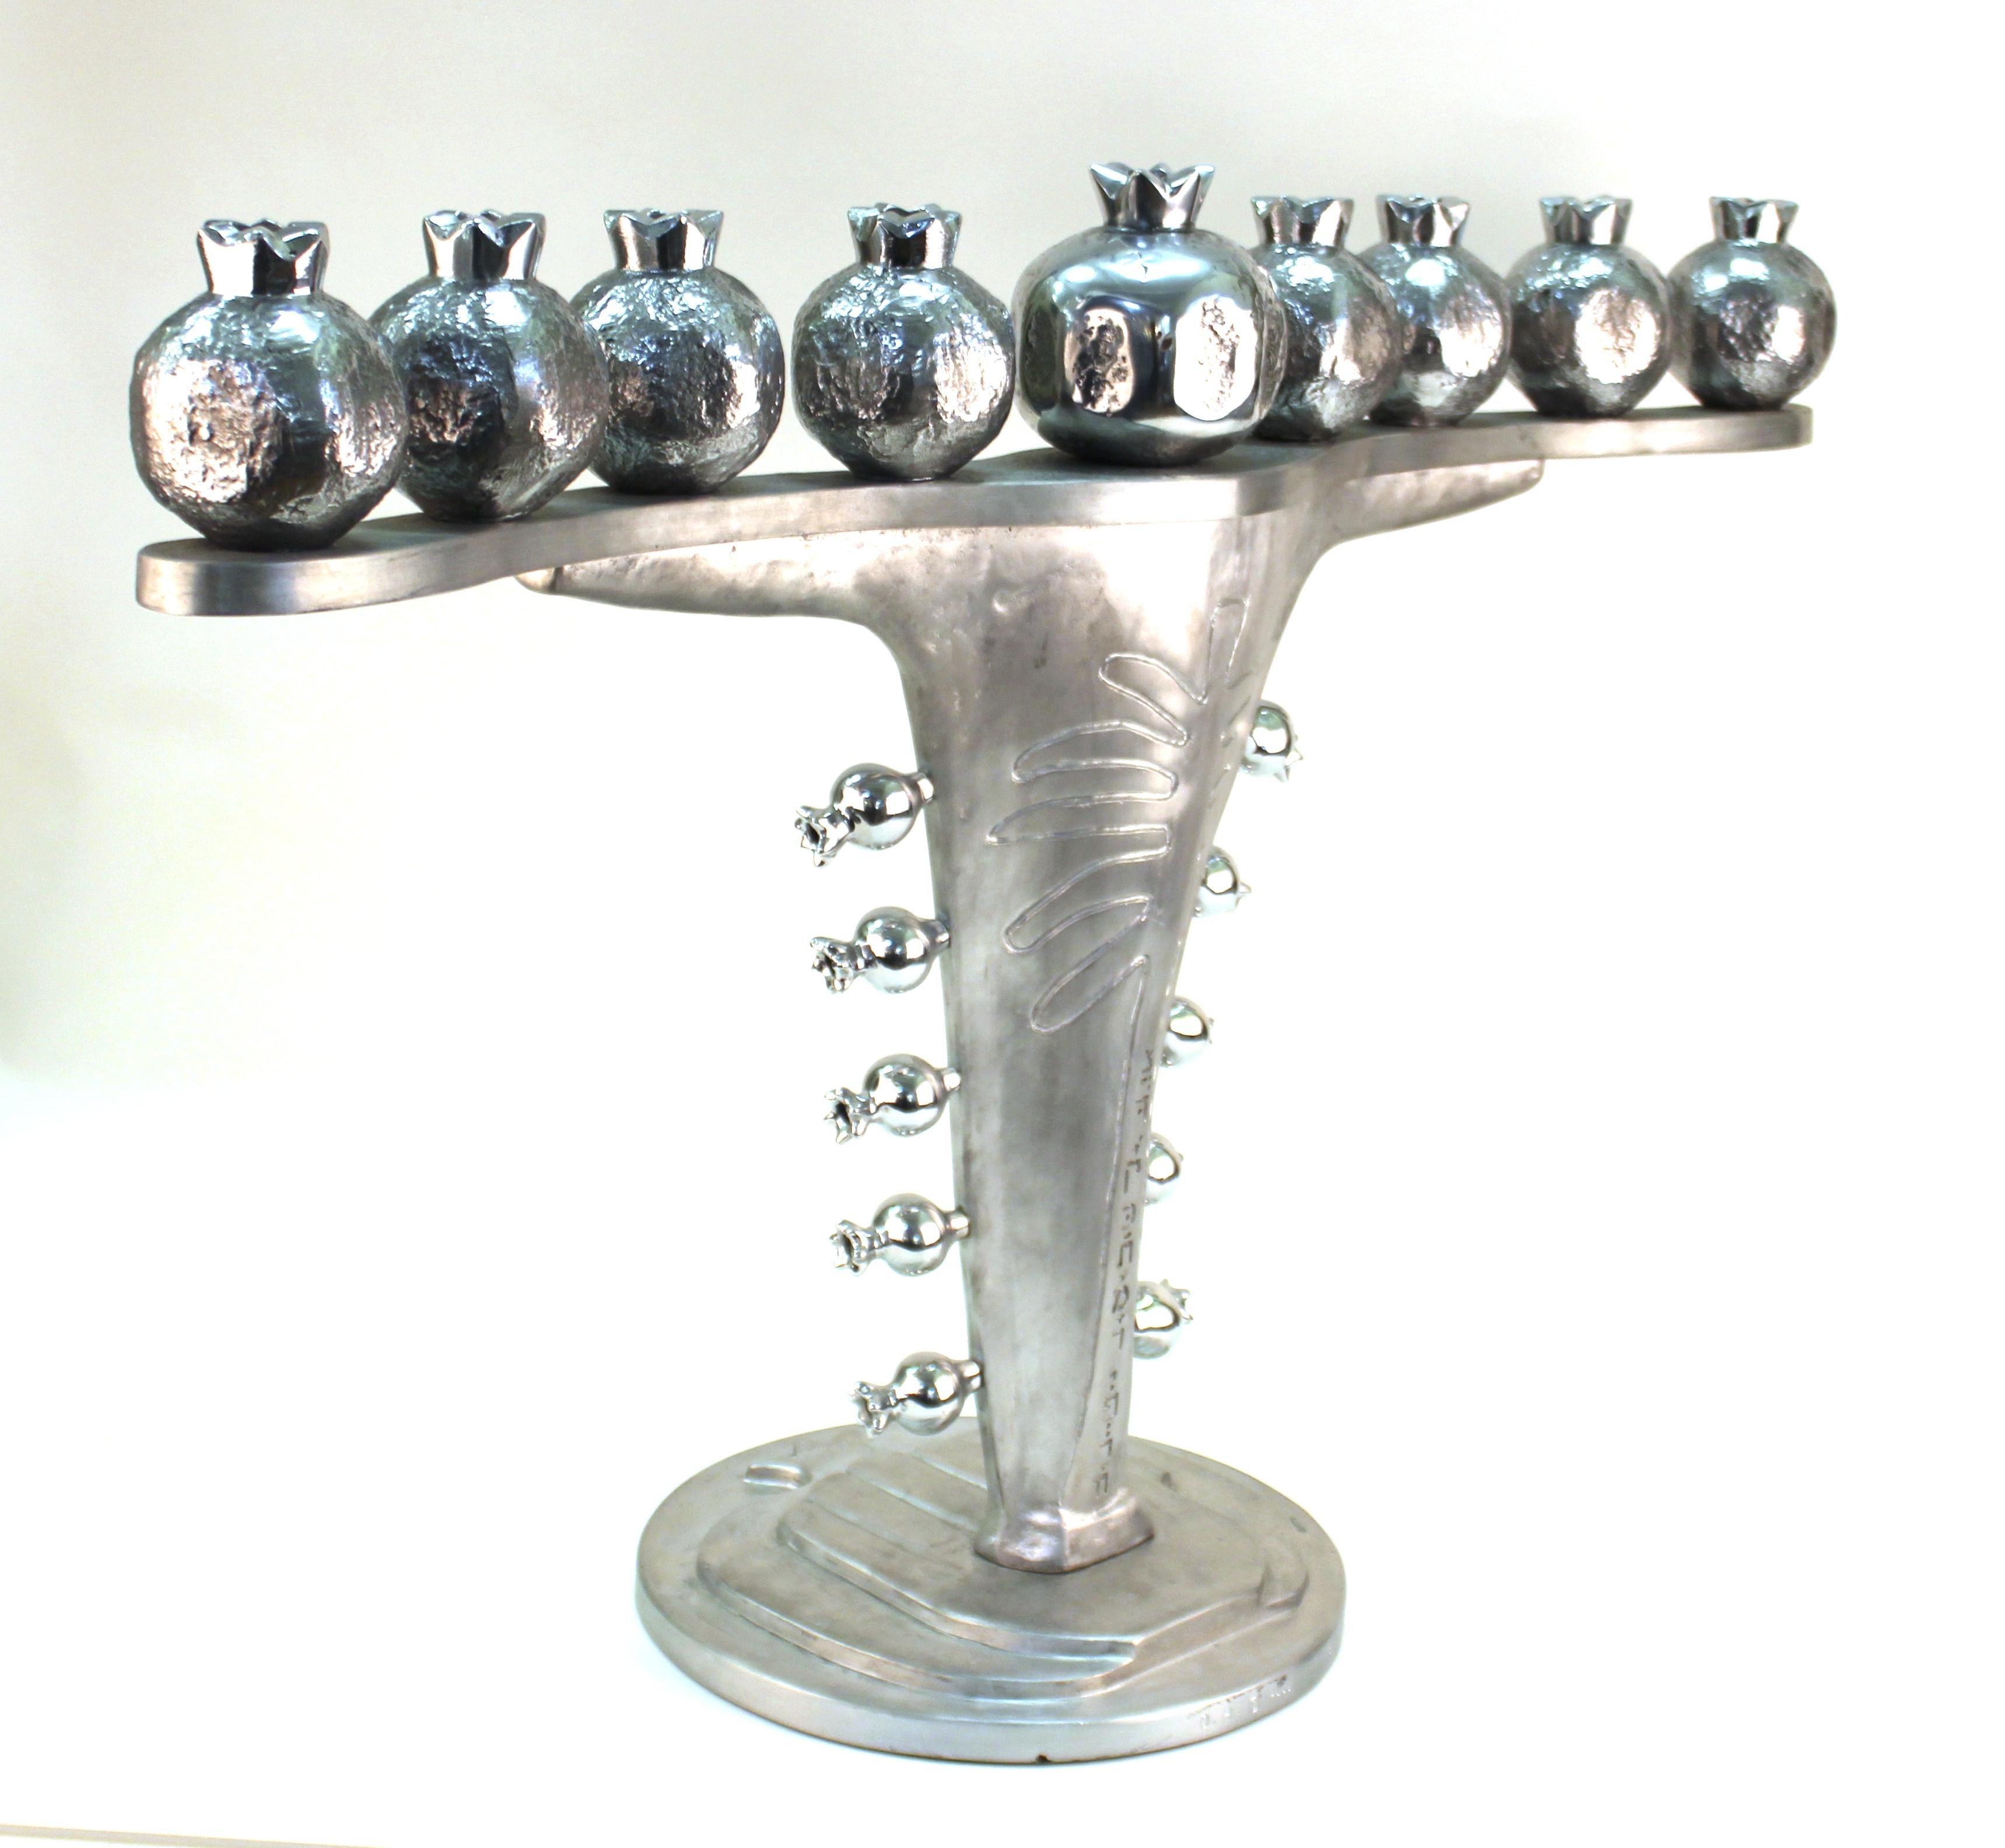 Modern cast aluminium menorah by Oded Halahmy, titled 'Happy Frond Lighting', created in 2005. Marked by the artist and dated on the base. In great vintage condition.